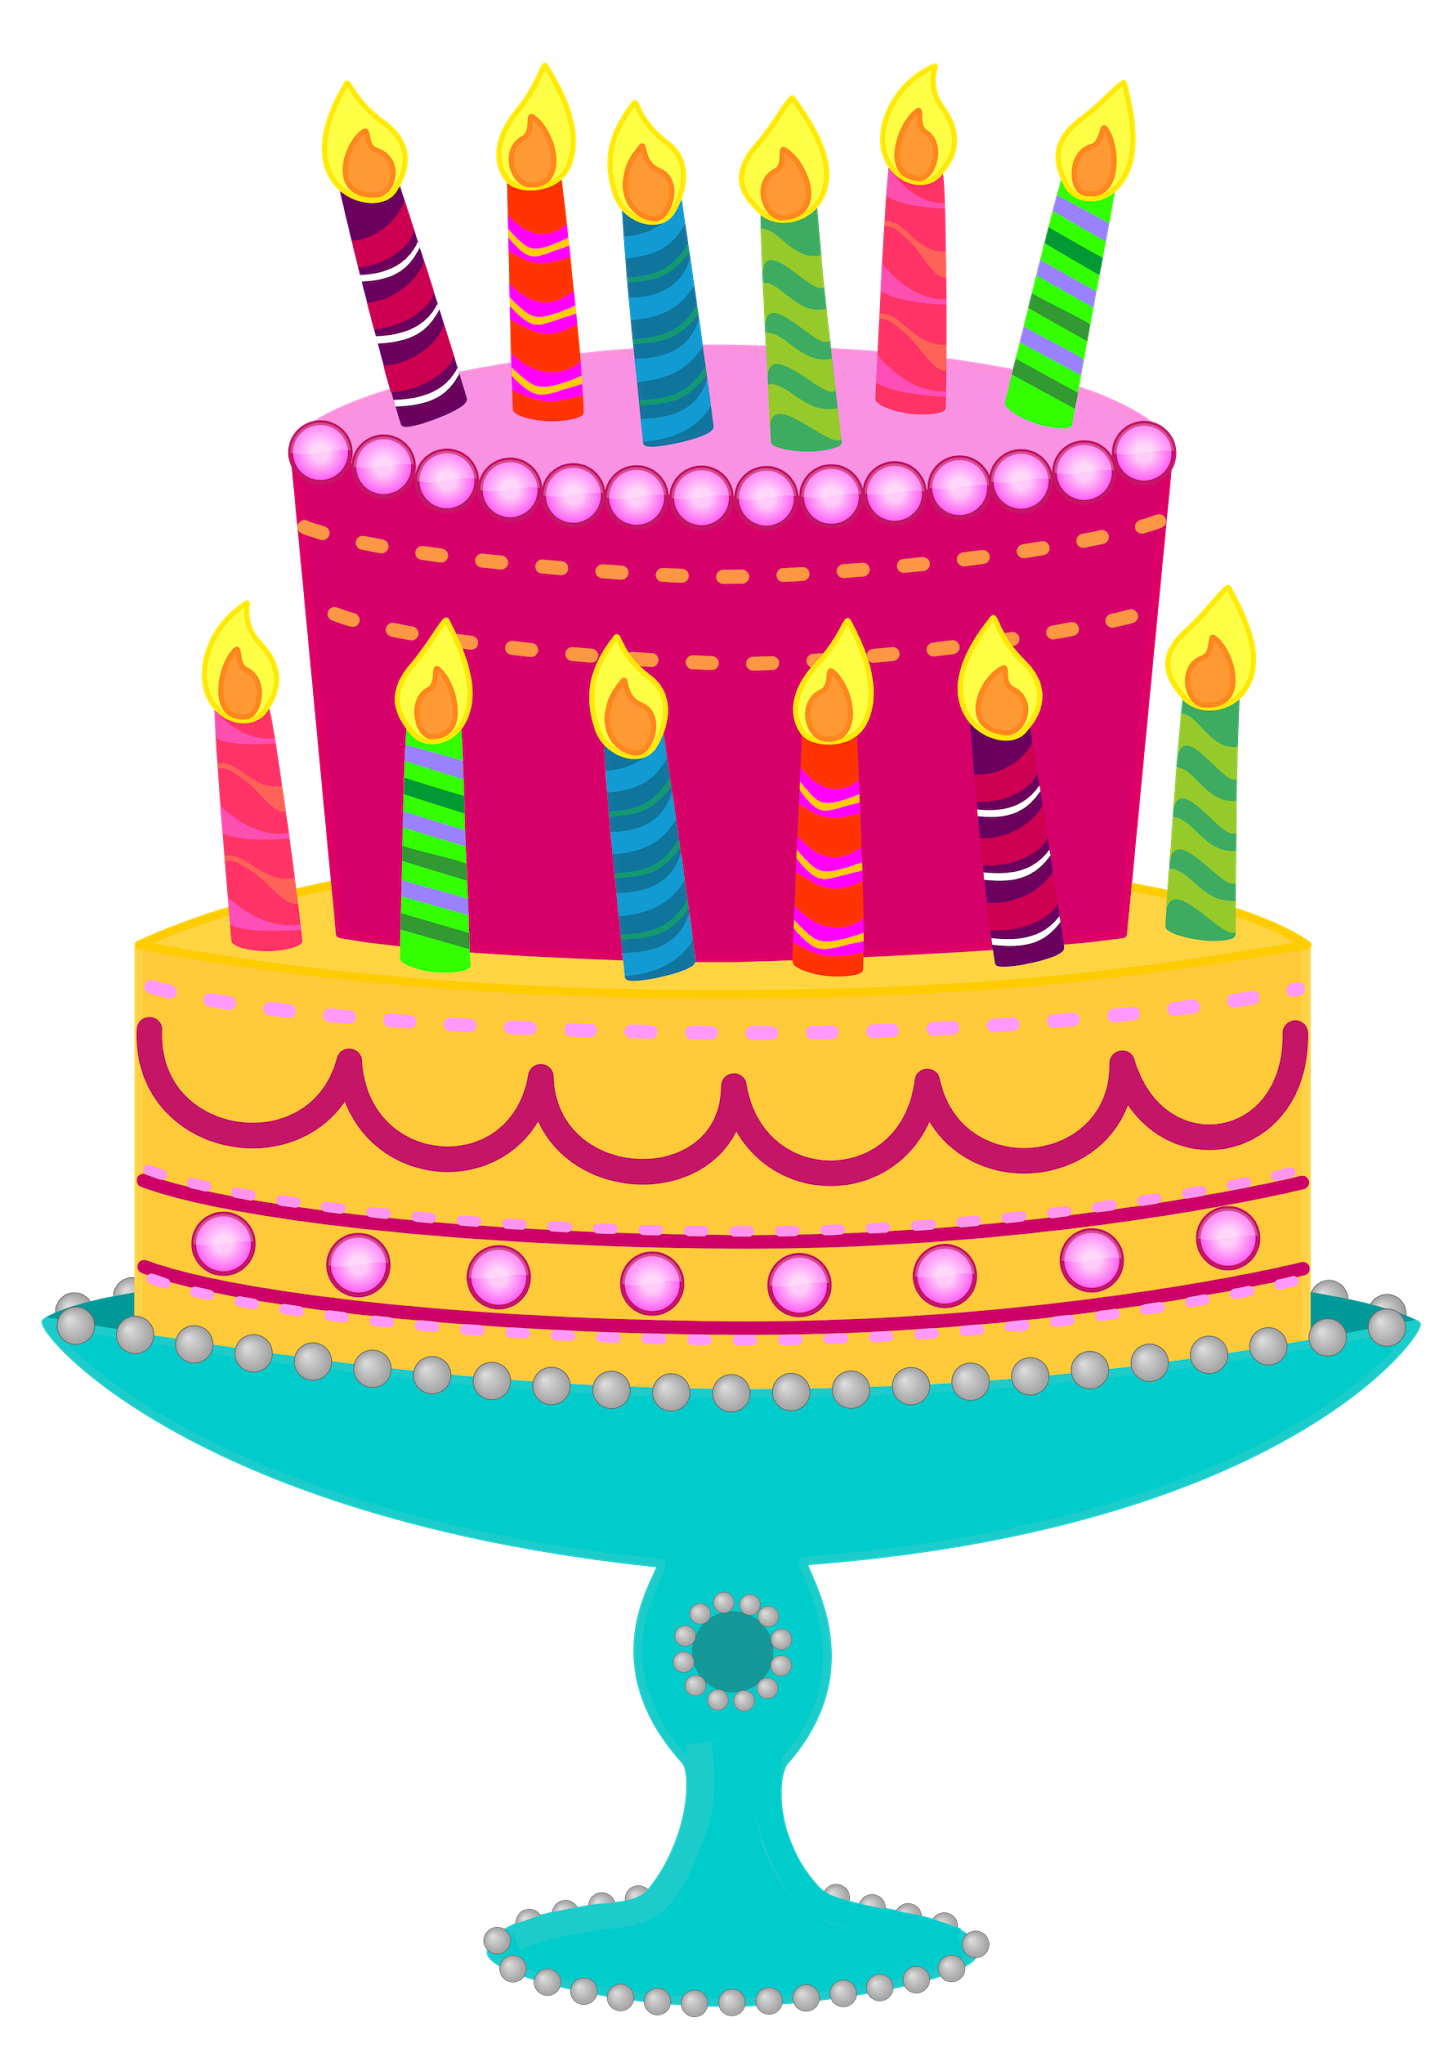 Birthday Cake Vector Background Design Happy Birthday Greeting Text With  Yummy Cake Element Decoration Stock Illustration - Download Image Now -  iStock